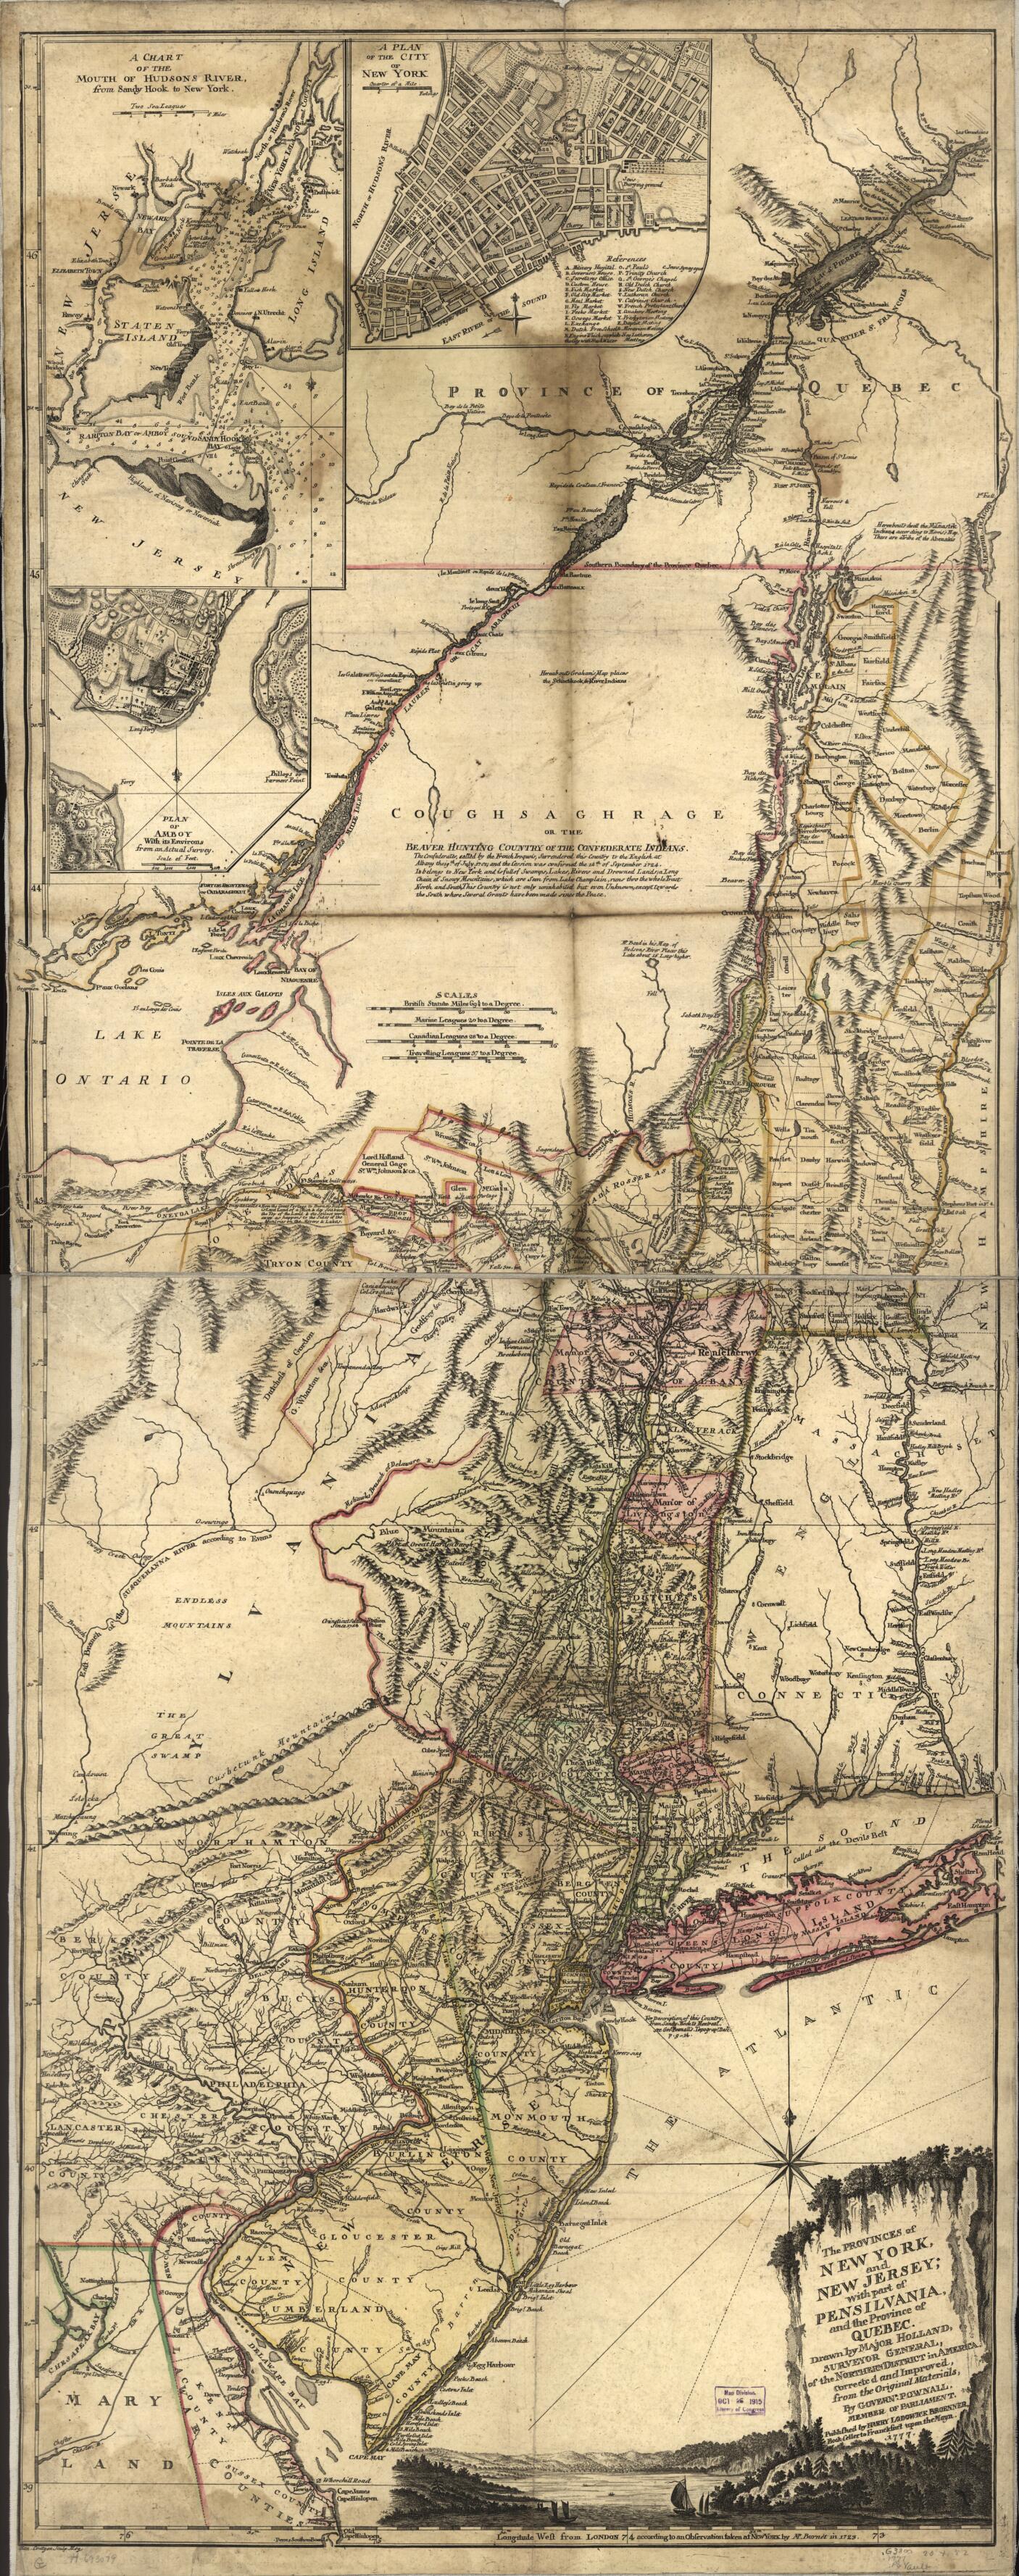 This old map of The Provinces of New York, and New Jersey; With Part of Pensilvania and the Province of Quebec. Drawn by Major Holland, Surveyor General of the Northern District In America from 1777 was created by Harry Lodowick Broenner, Henry Contger, 